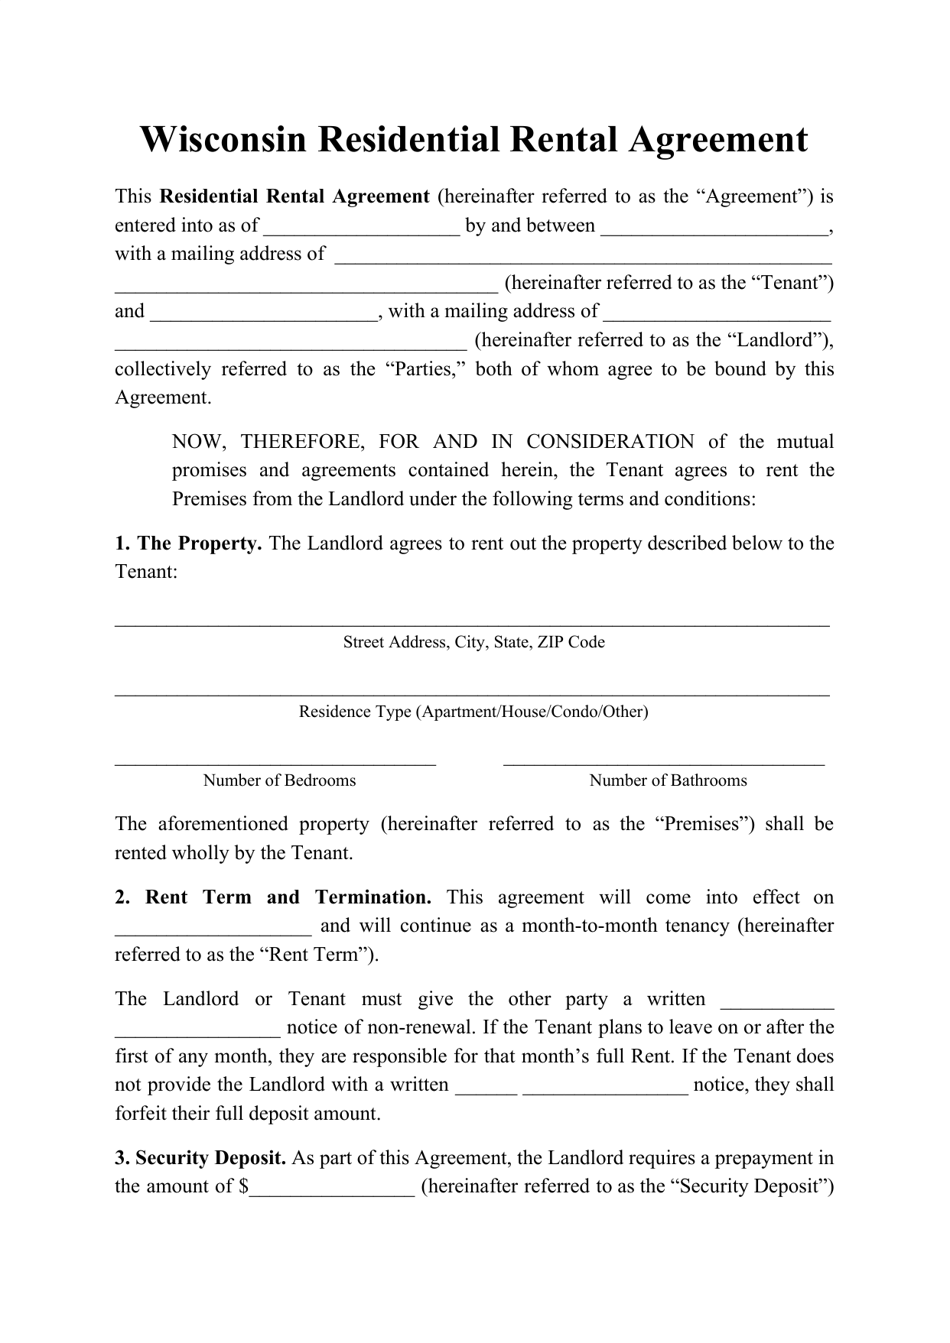 Residential Rental Agreement Template - Wisconsin, Page 1